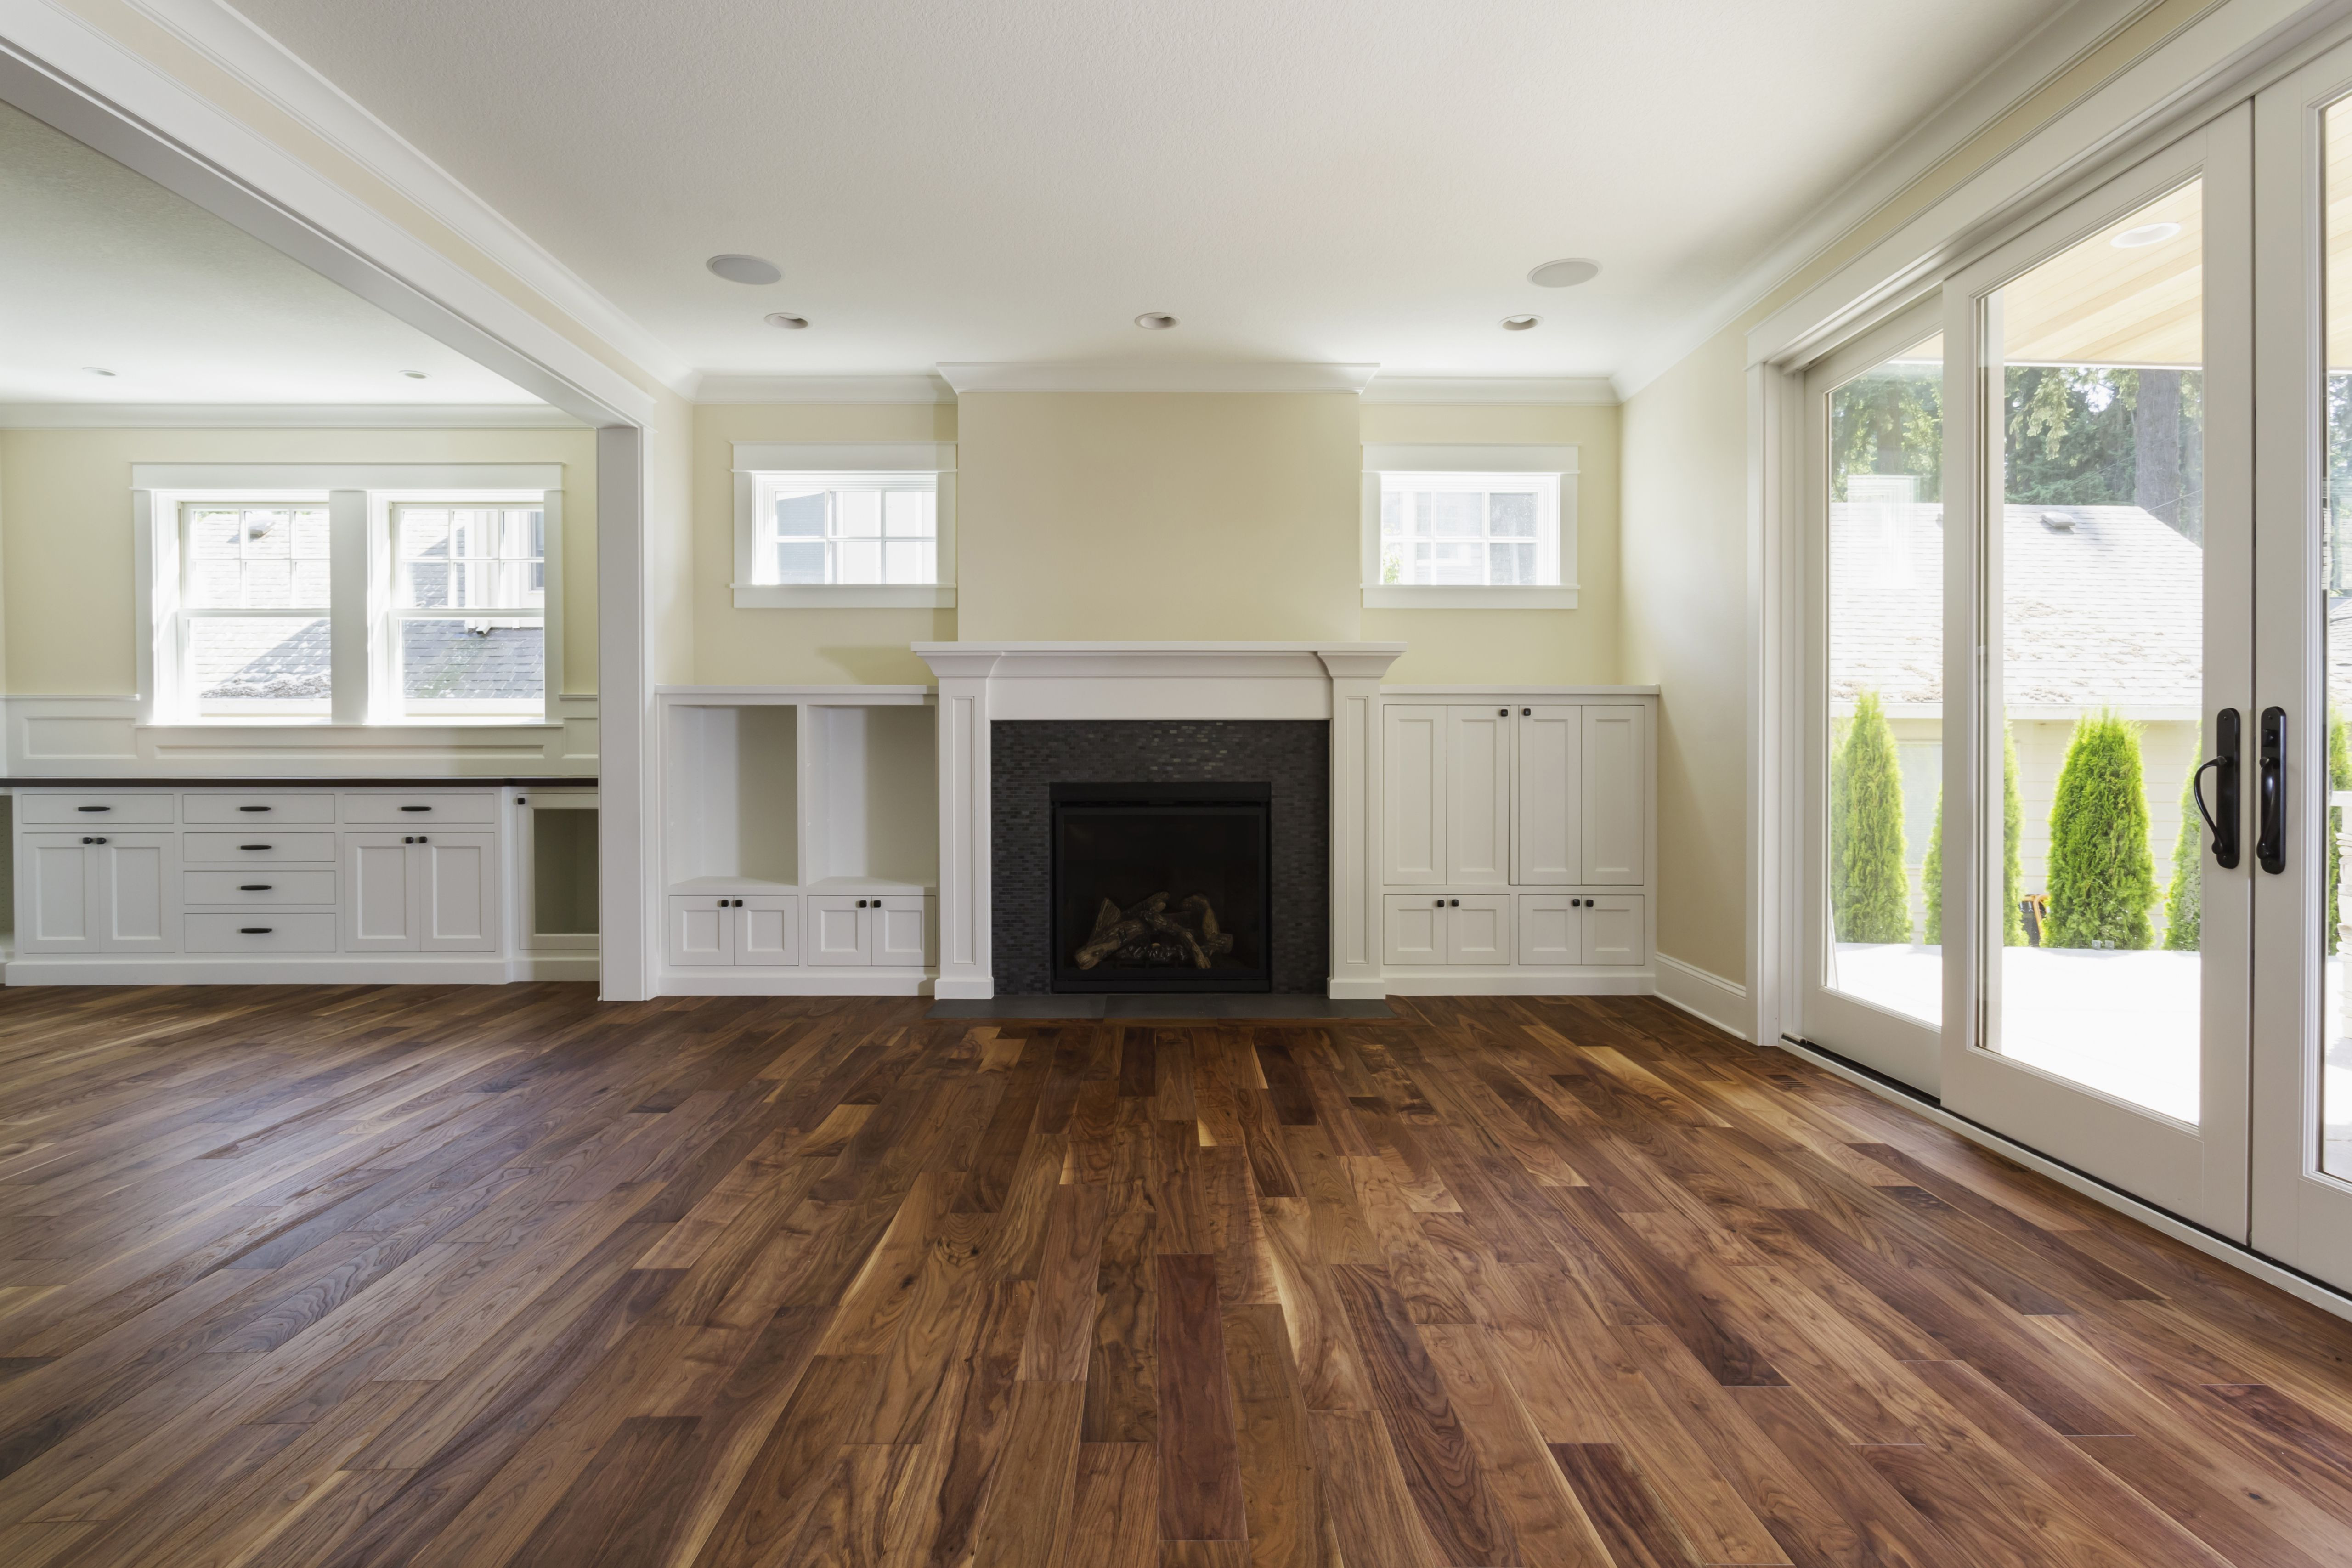 30 attractive Hardwood Floor Installation Contractors 2024 free download hardwood floor installation contractors of the pros and cons of prefinished hardwood flooring in fireplace and built in shelves in living room 482143011 57bef8e33df78cc16e035397